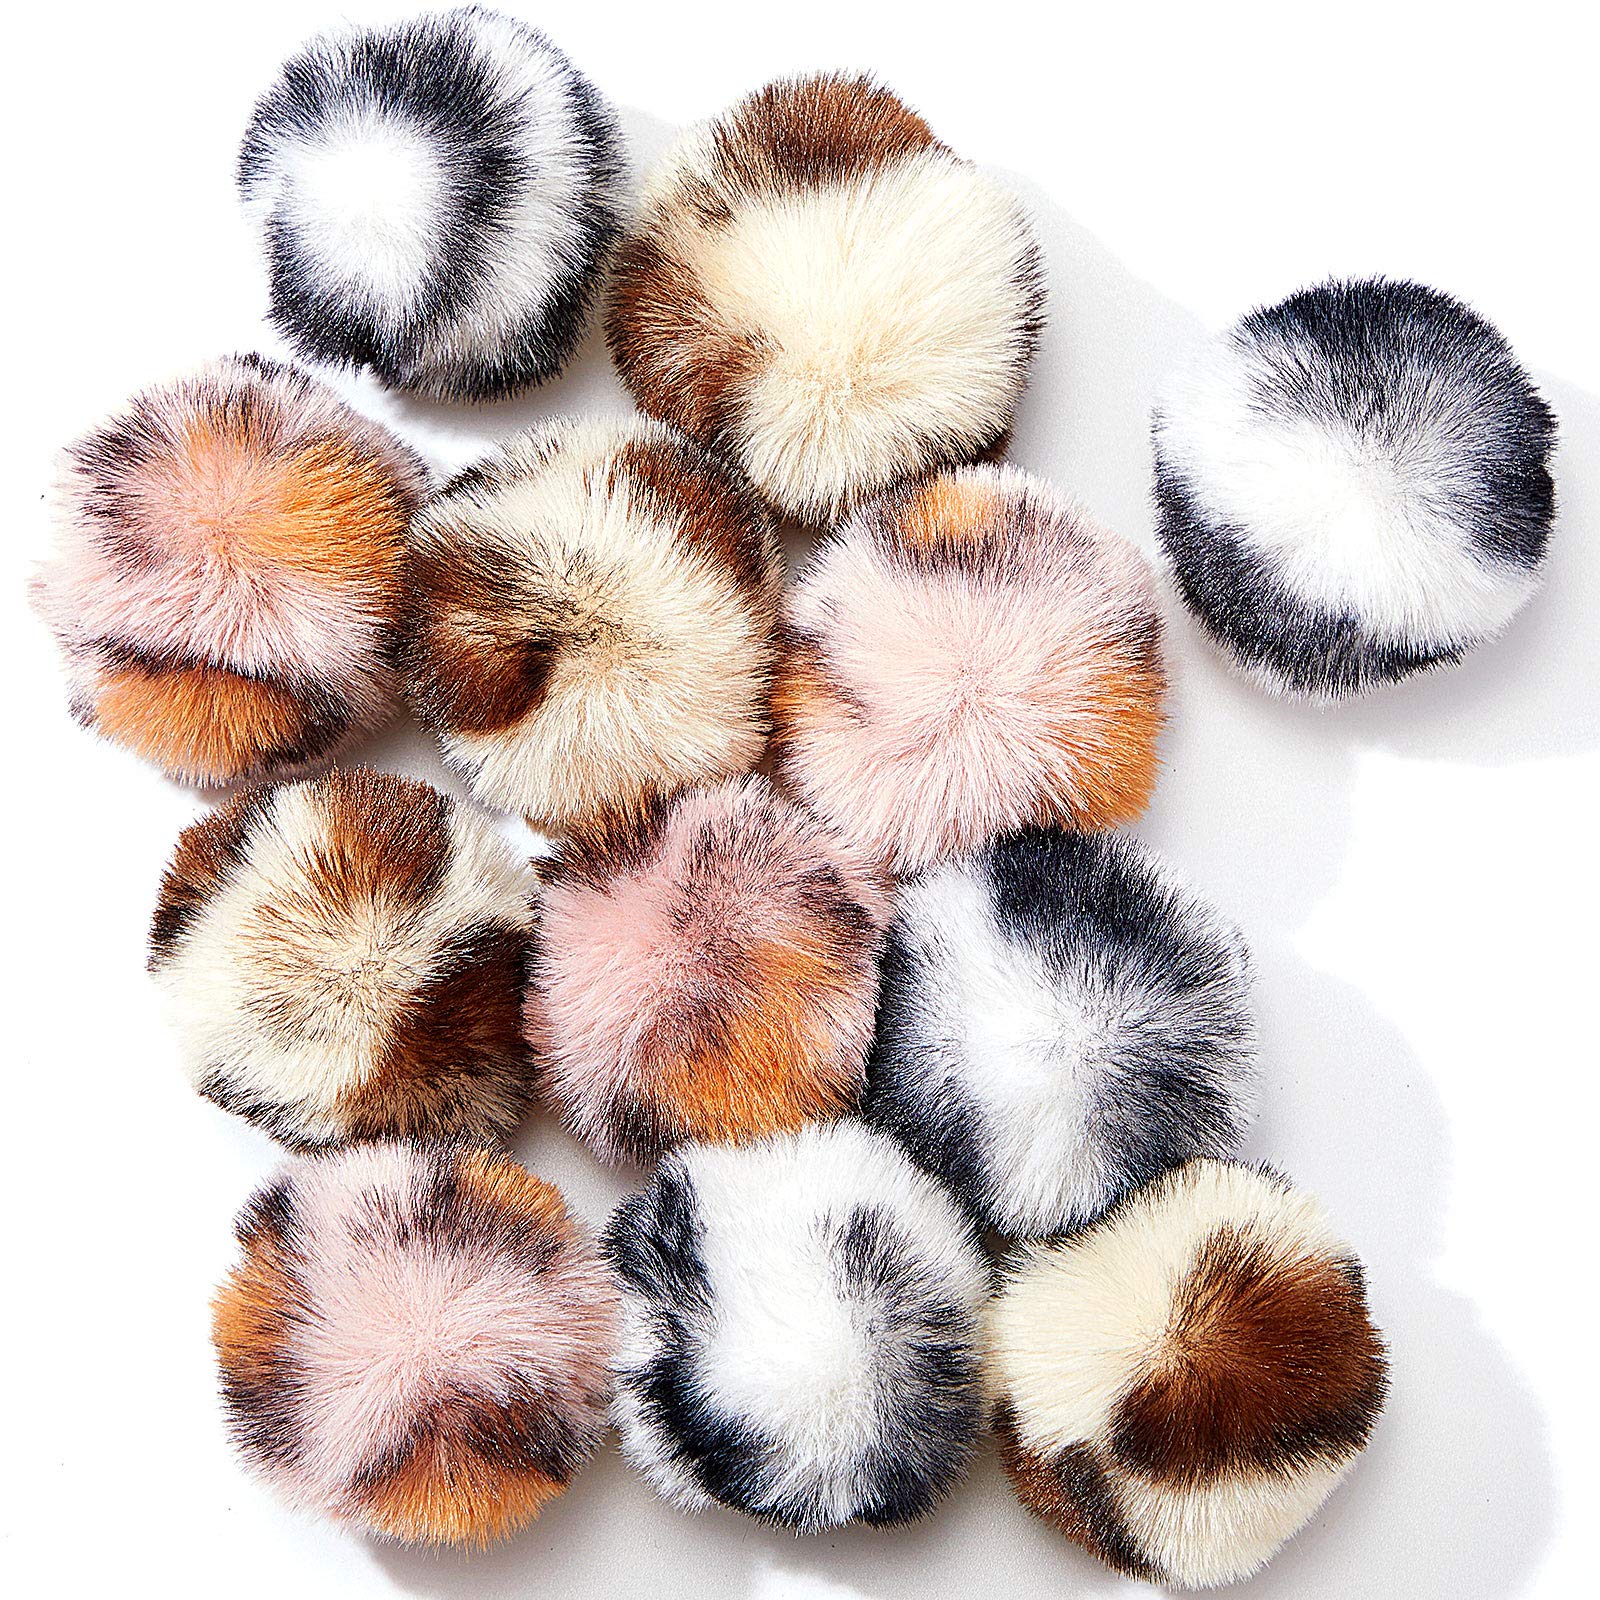 Weewooday 12 Pieces cat Pom Pom Balls Toys Fuzzy cat Ball Artificial Large  Plush Pets Ball for cats Interactive Playing Quiet Ba